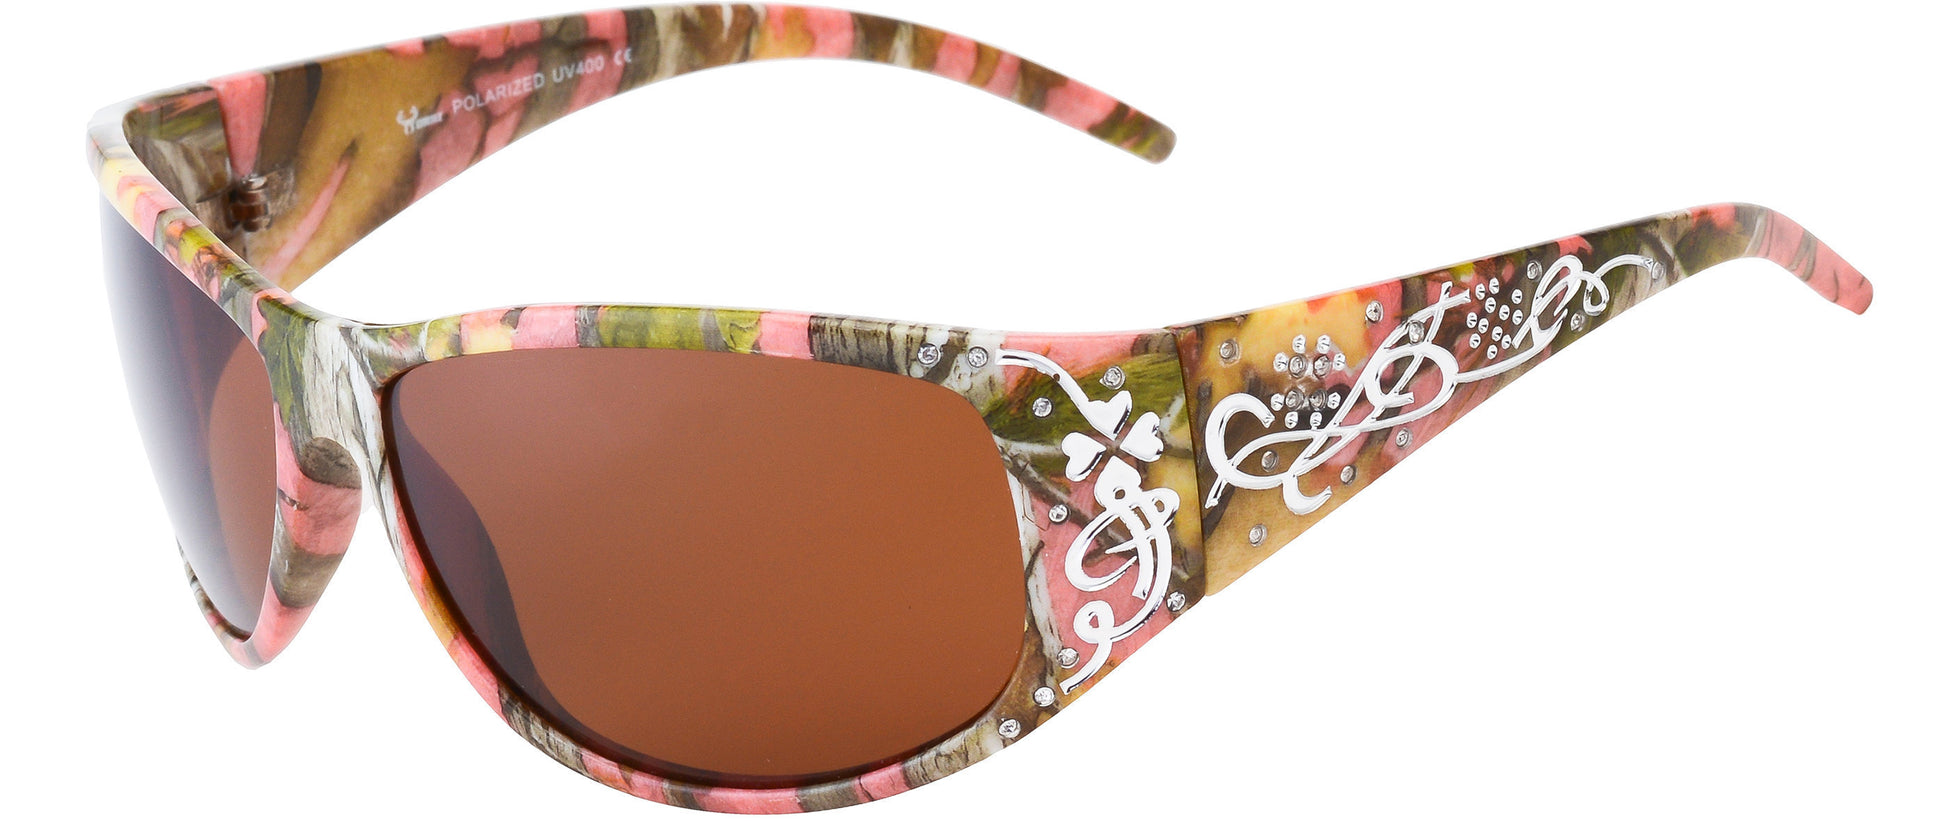 Main image: Hornz Pink Camouflage Polarized Sunglasses Country Girl Style Camo & Free Matching Microfiber Pouch - Pink Camo Frame - Amber Lens